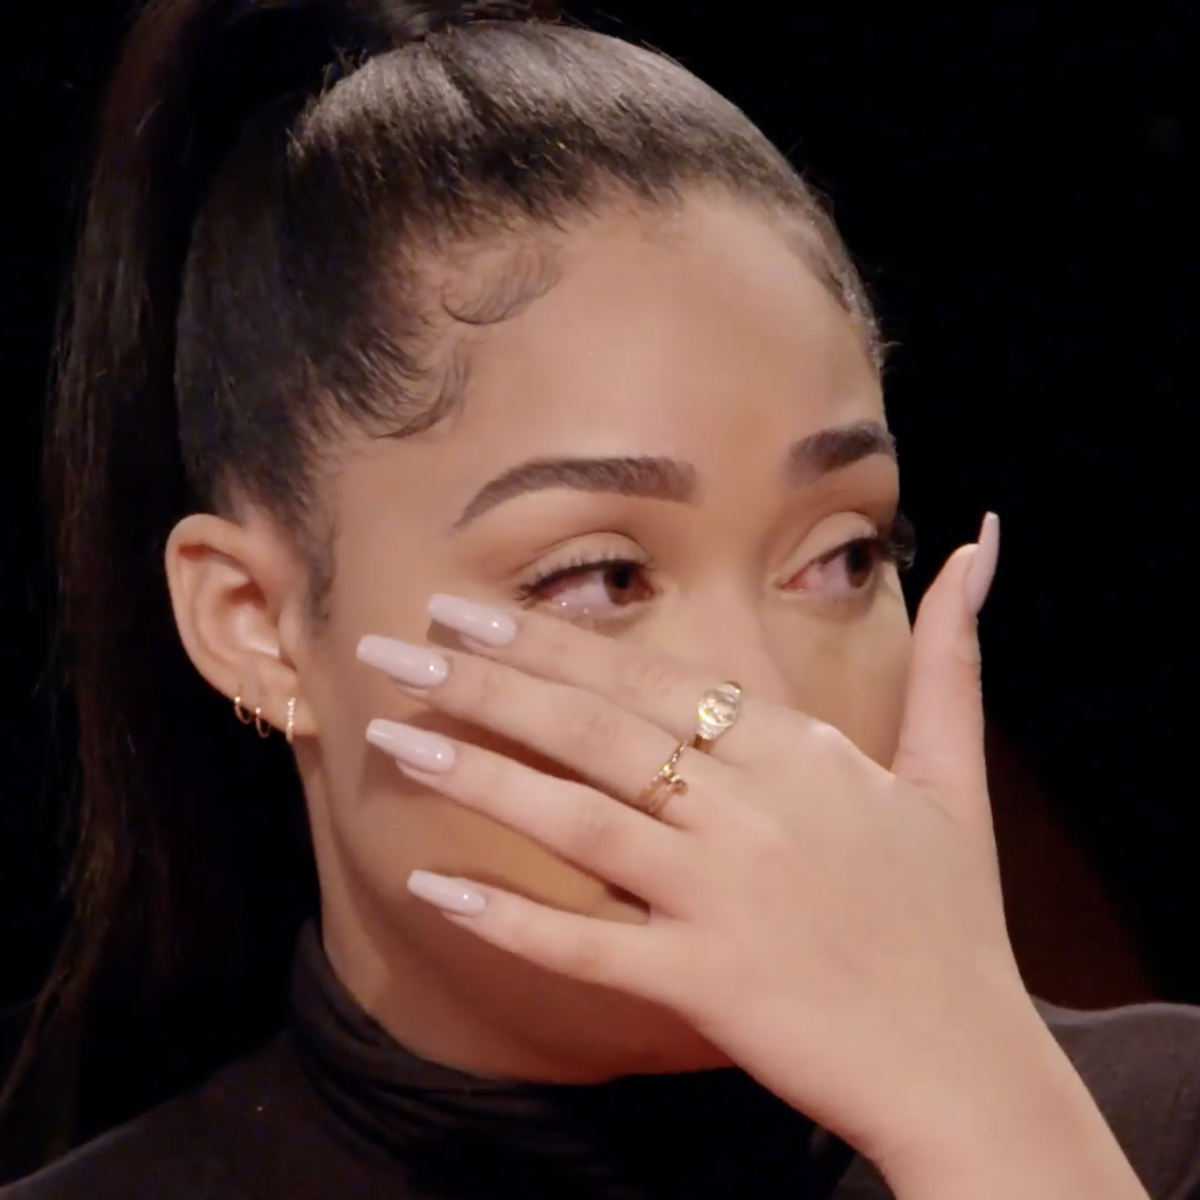 Twitter Is Out About Jordyn on 'Red Table Talk'